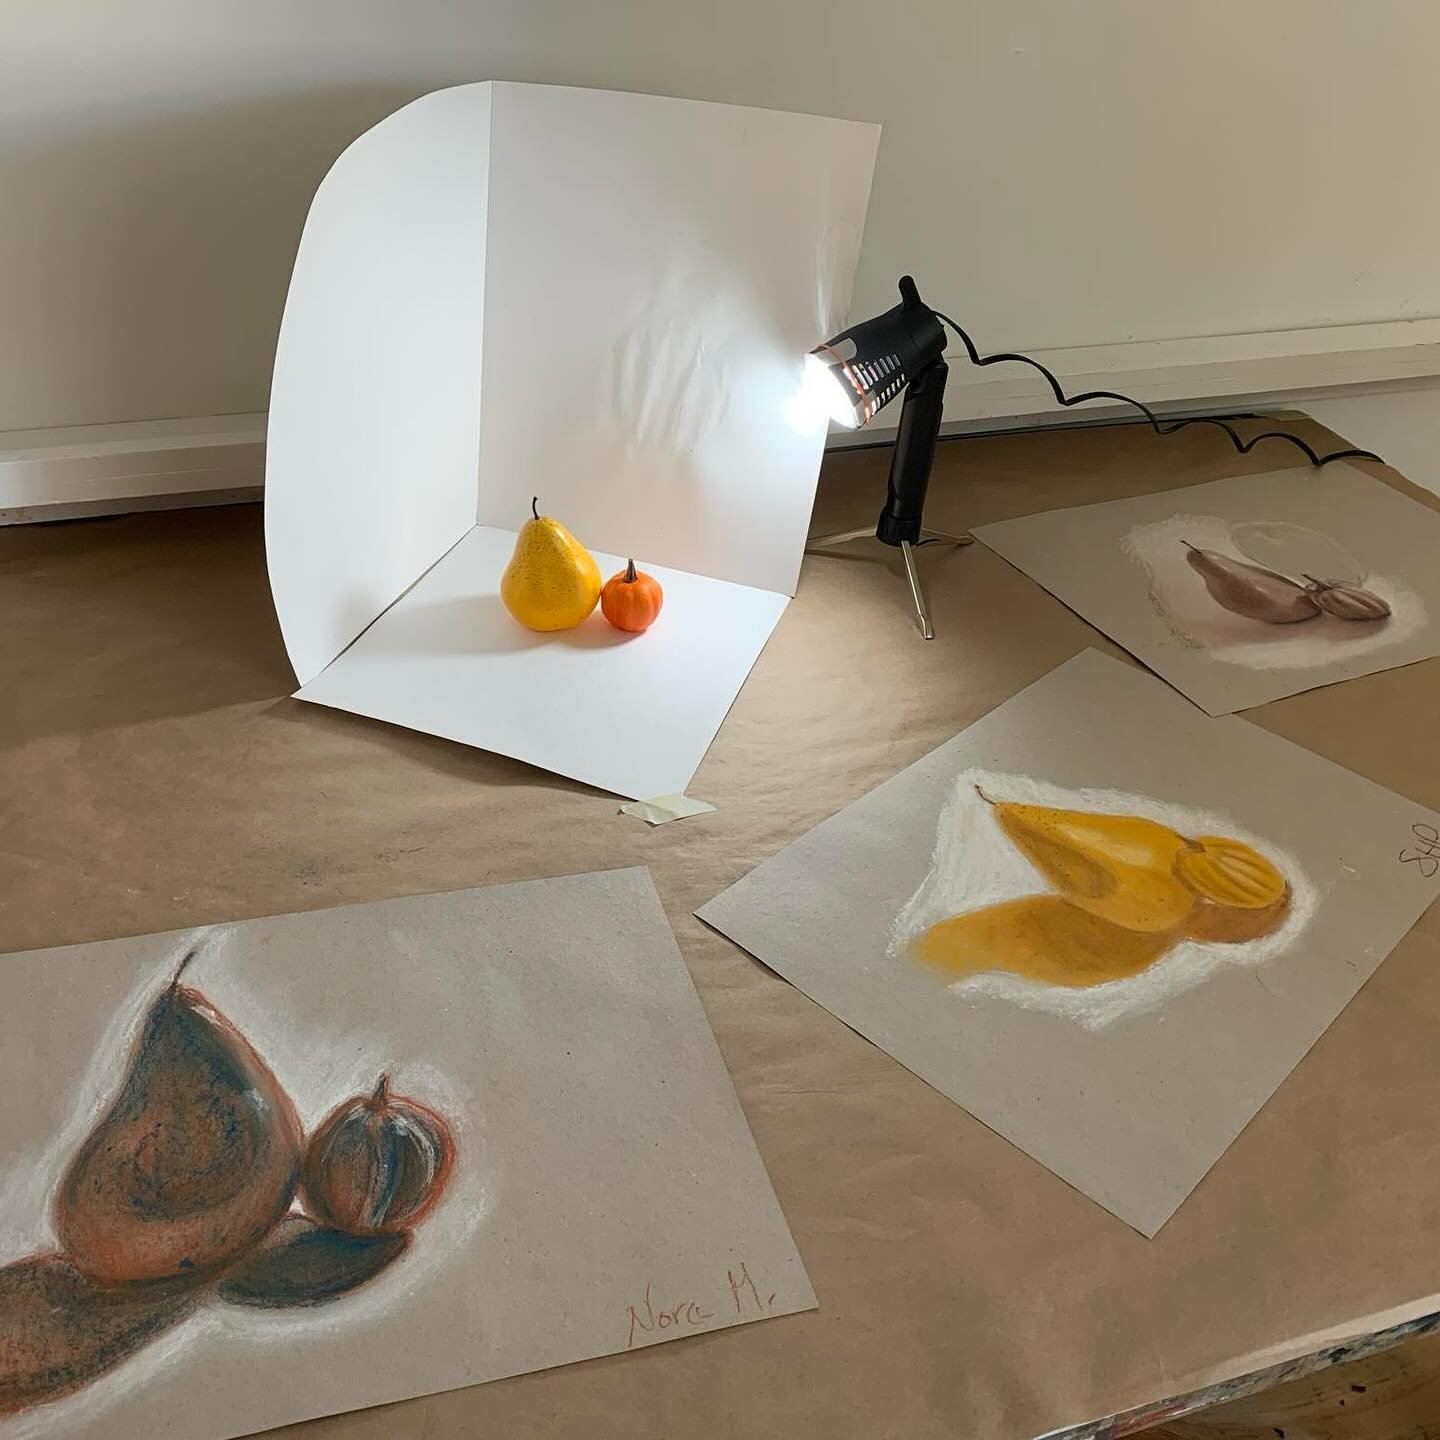 #Didyouknow that we offer adult art workshops on weekday afternoons? Thursday is #drawing day and today we had a blast learning to use #conte for a #stilllifedrawing of citrus fruits. Learning to draw is all about practice and maintaining a healthy s